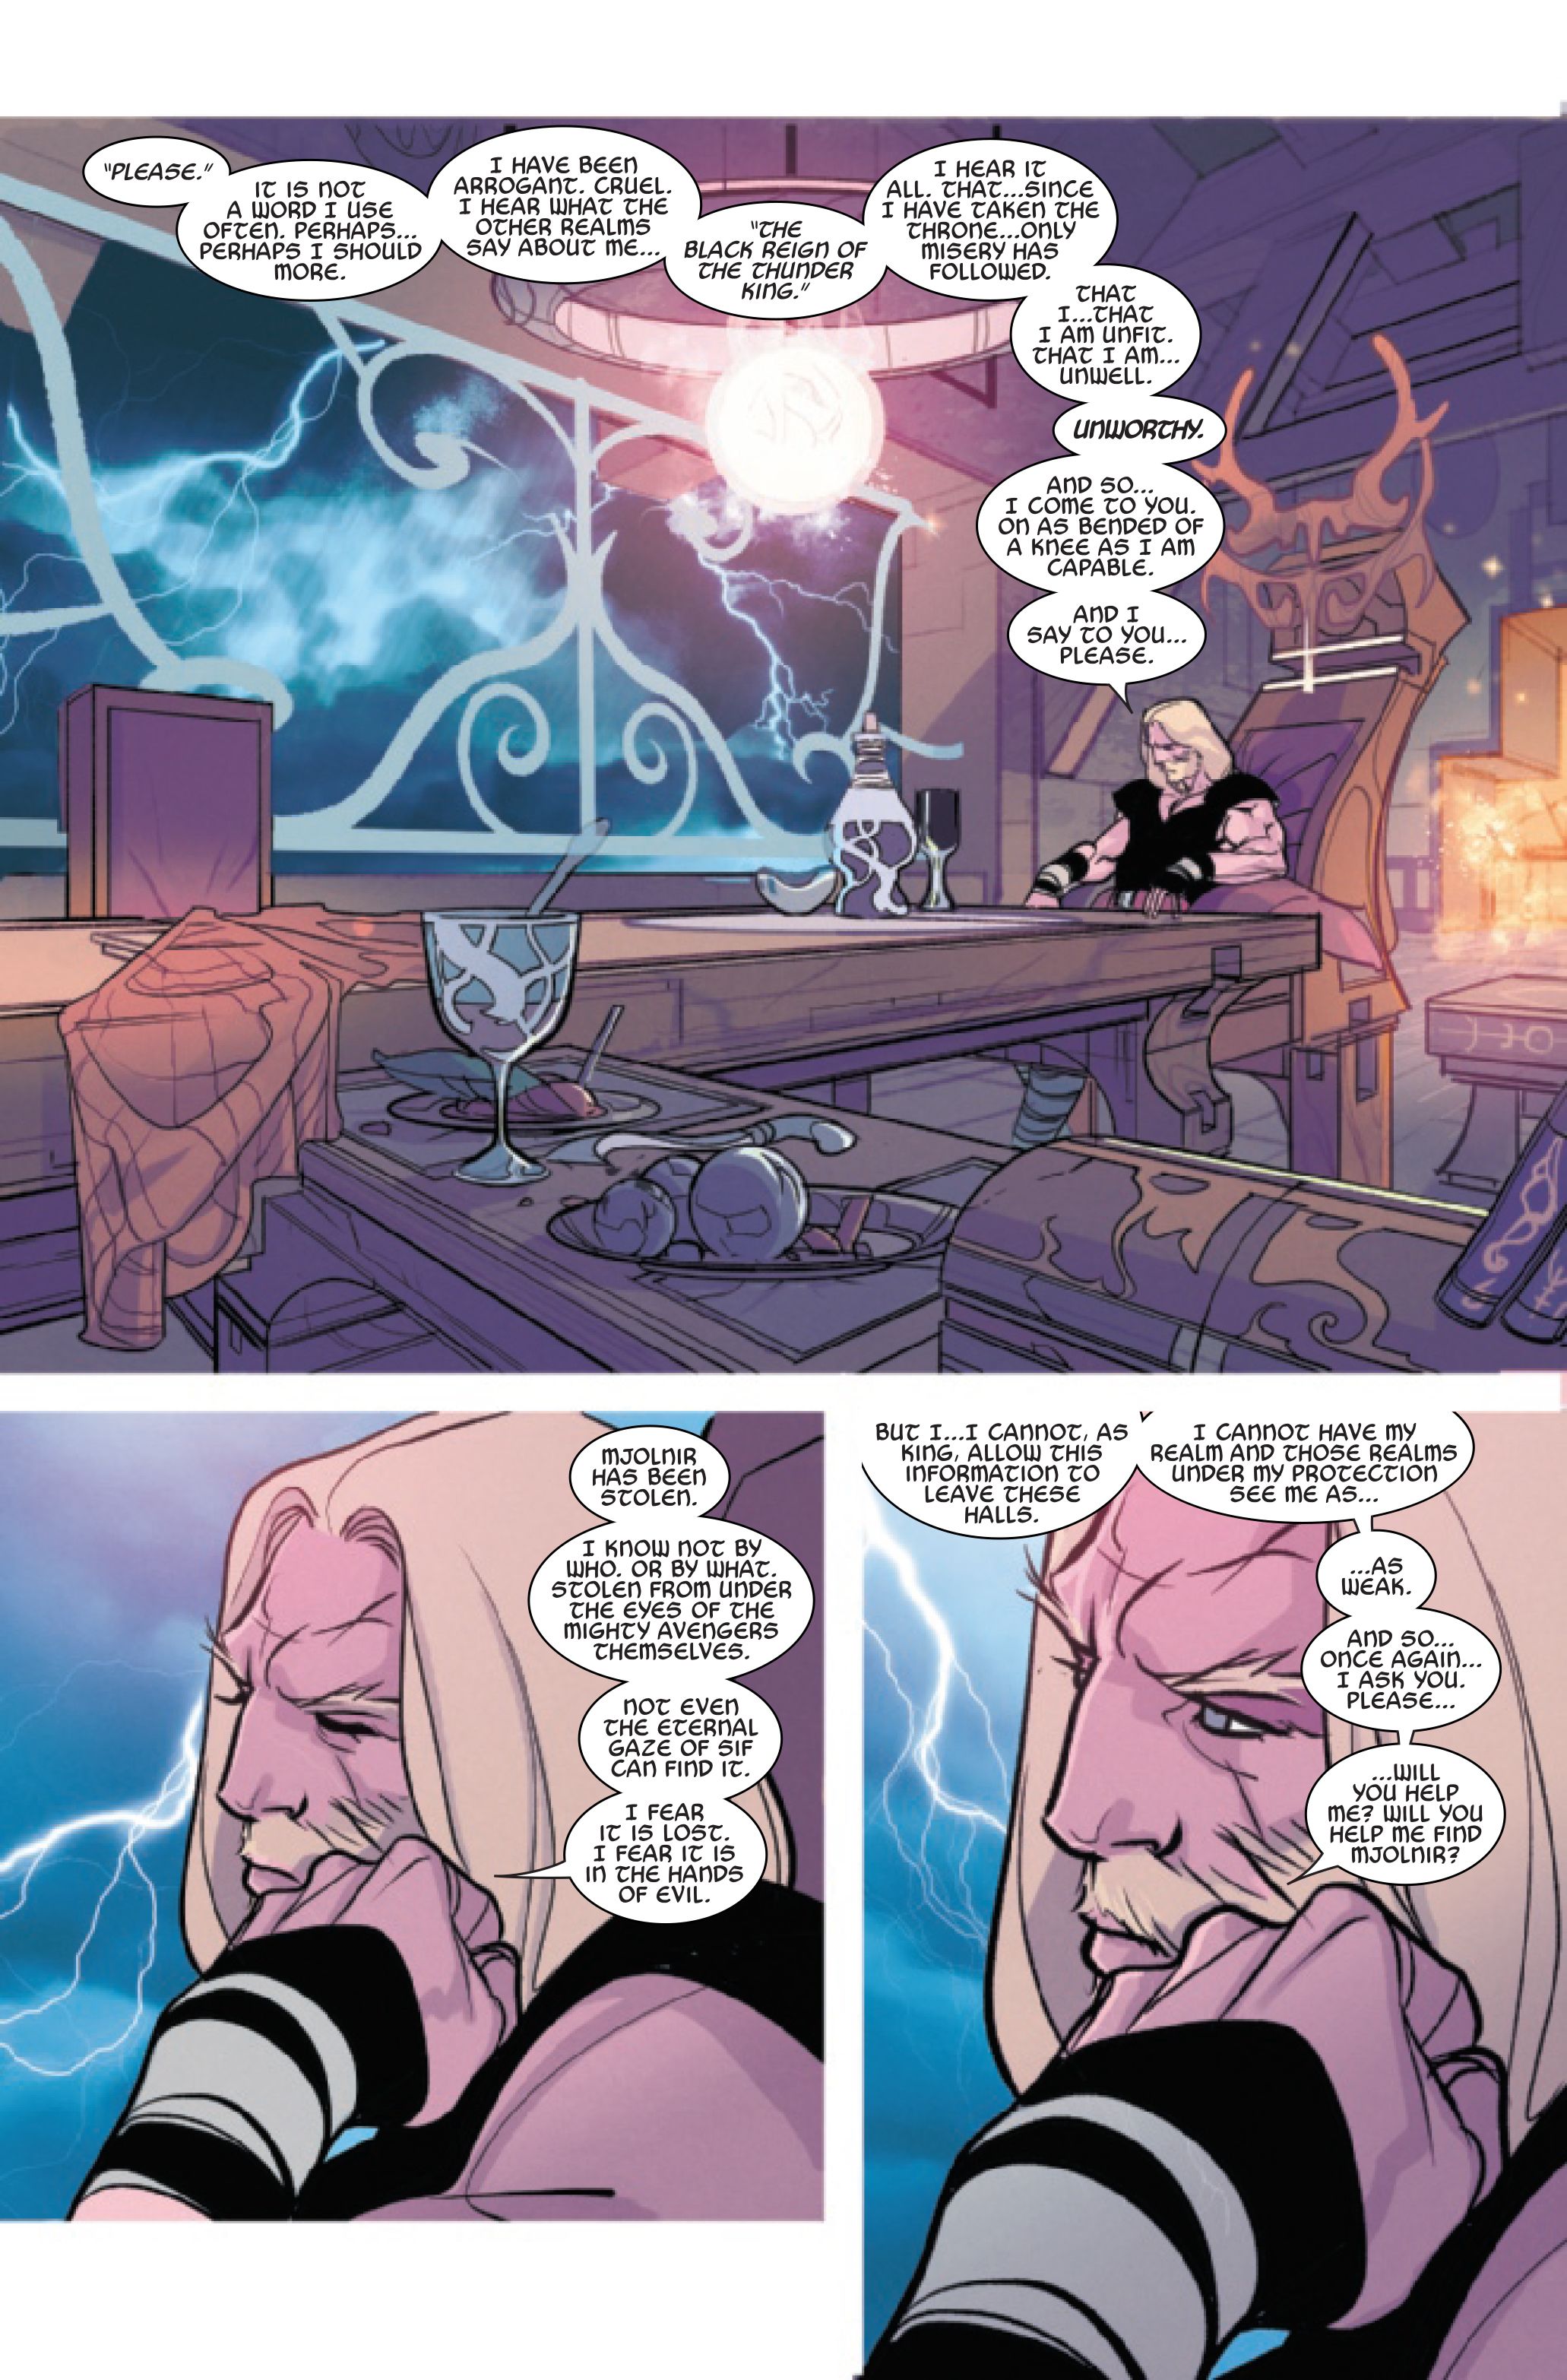 Page 2 of Thor #18, by Donny Cates, Pasqual Ferry and Bob Quinn.